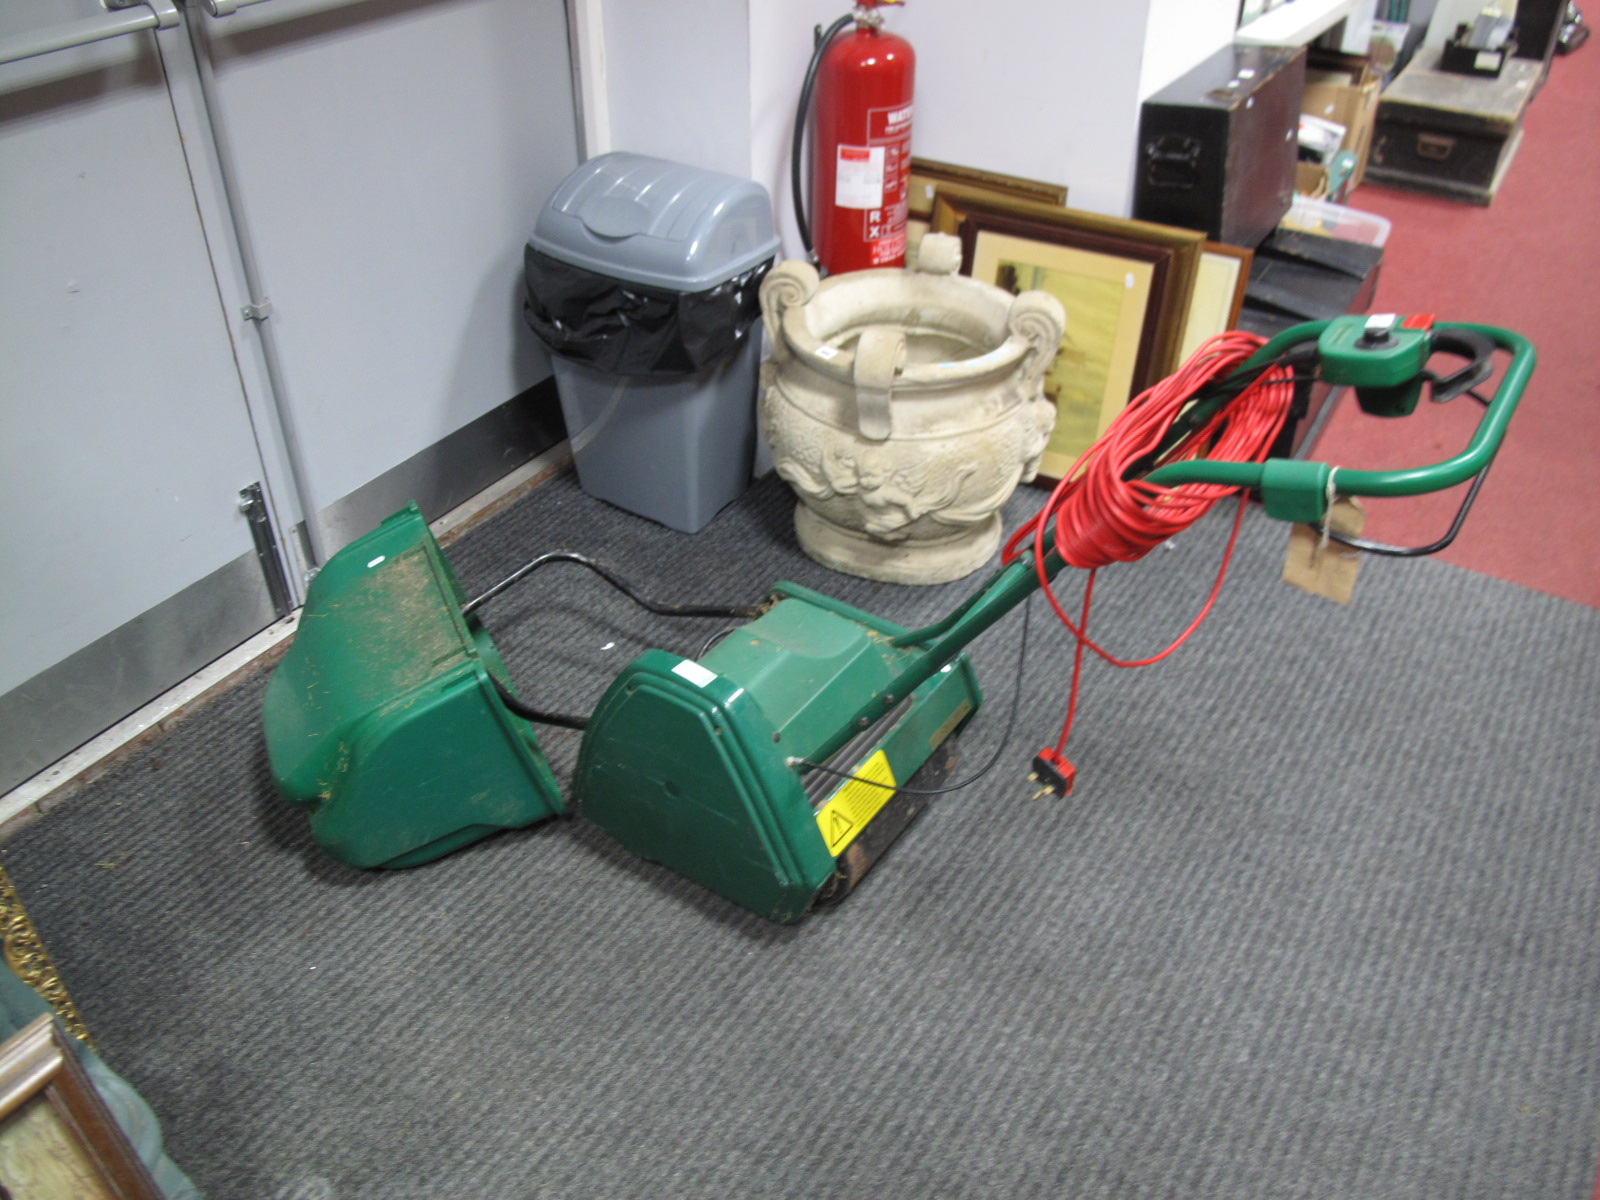 A Qualcast Electric 305 Lawn Mower, with grass basket.